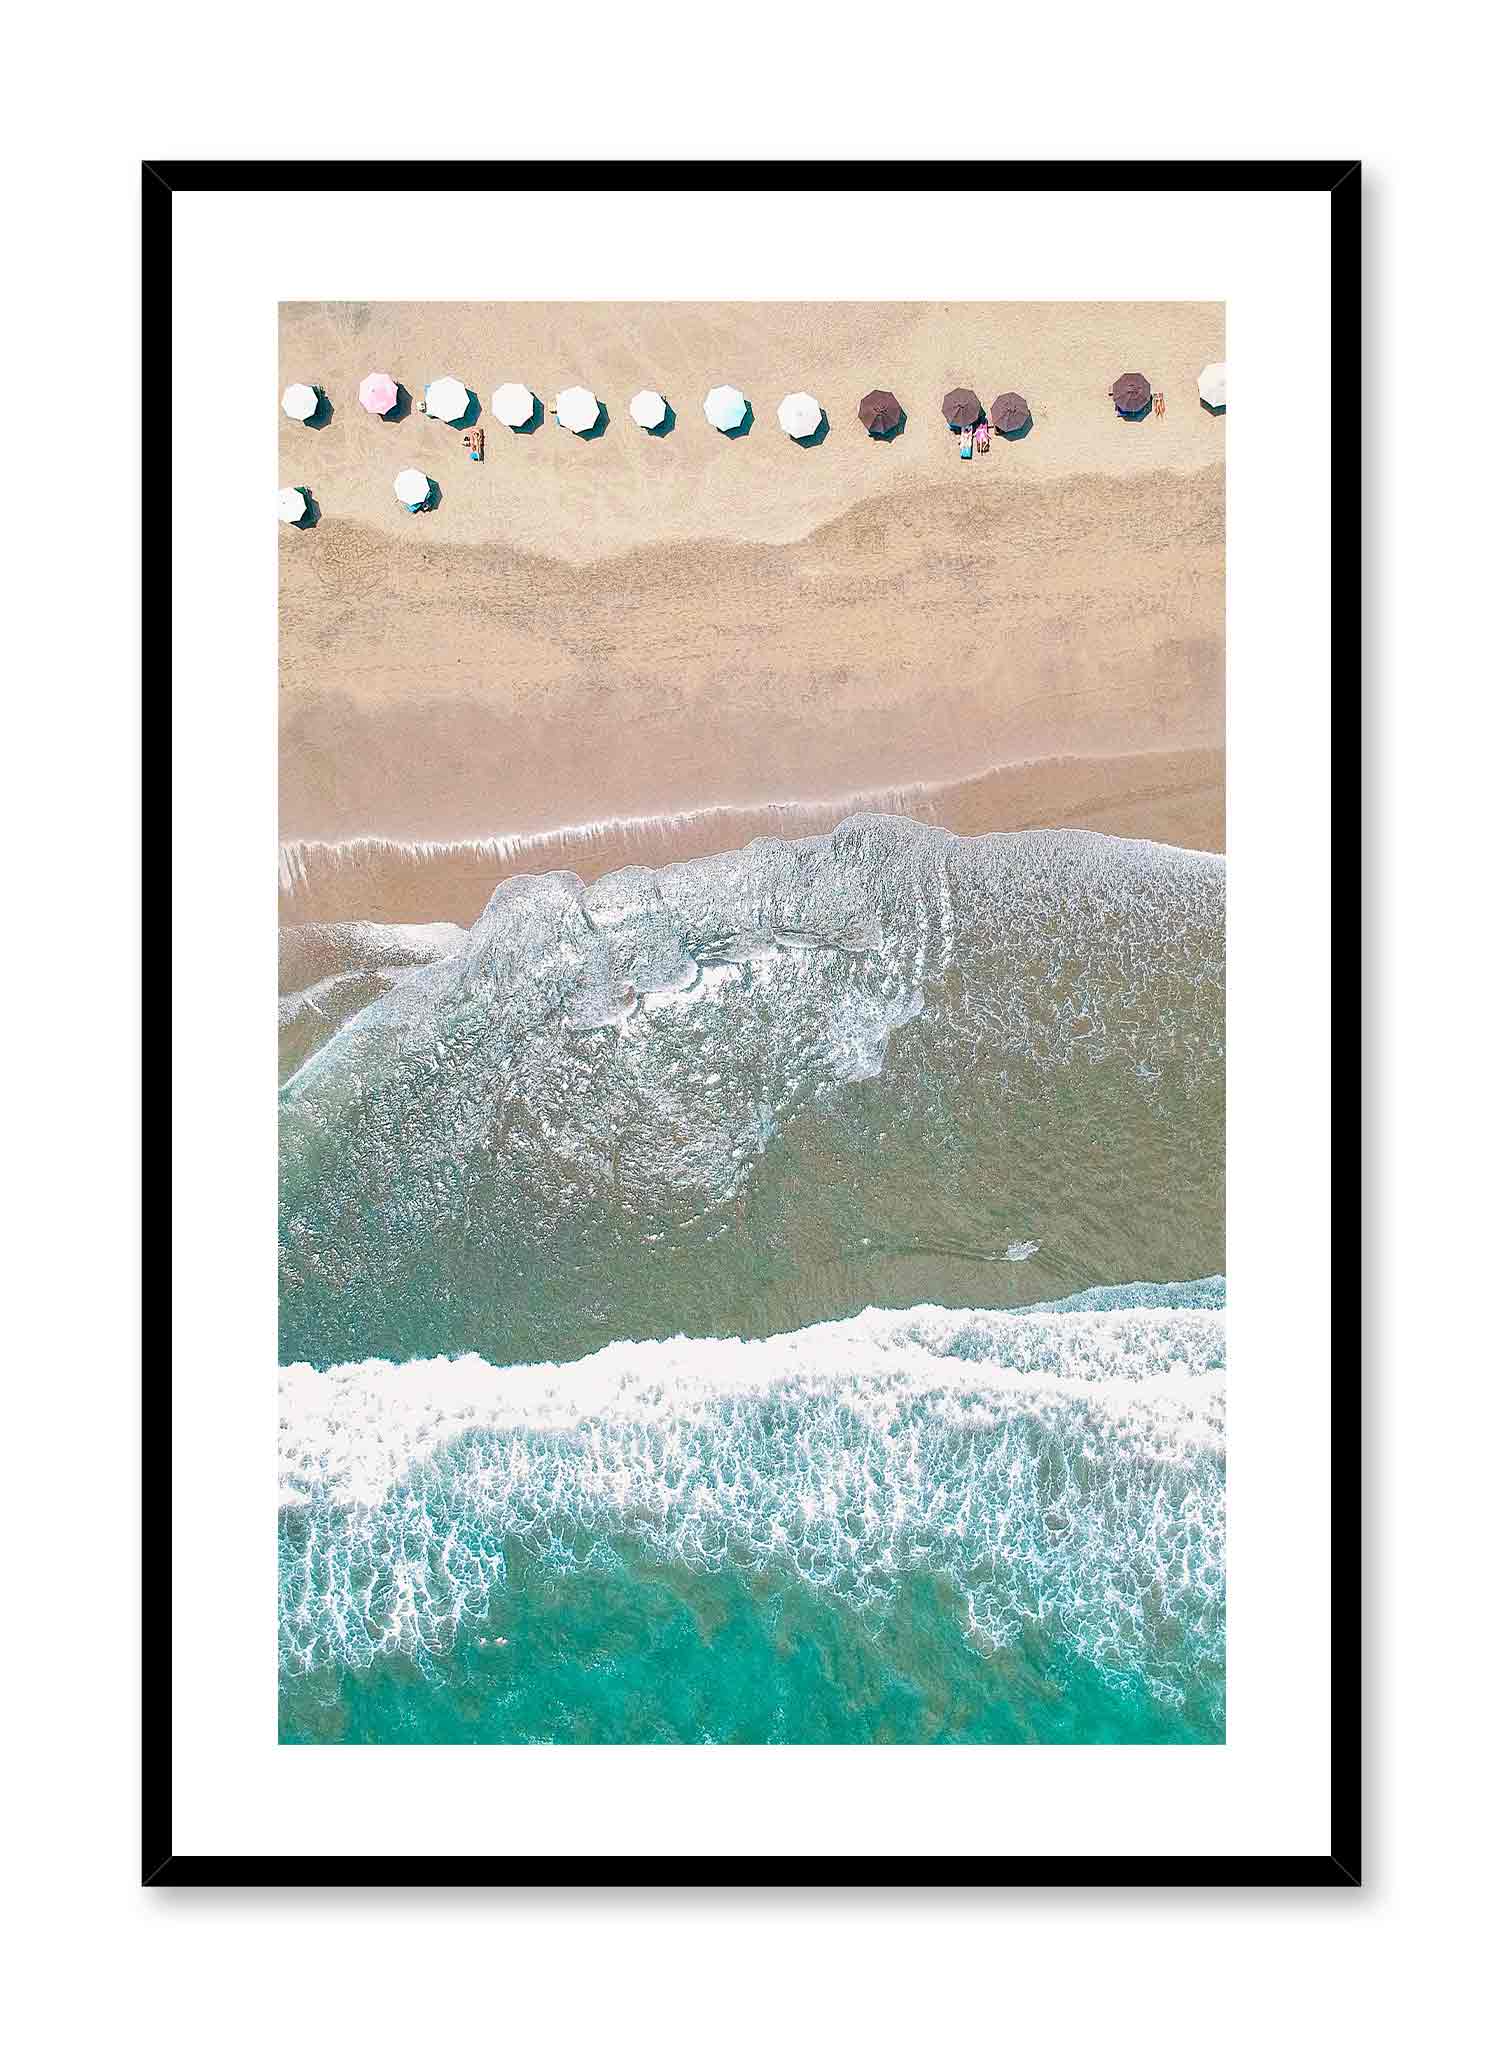 Beach Day is a minimalist photography poster of a bird view of a beach filled with parasols by Opposite Wall.